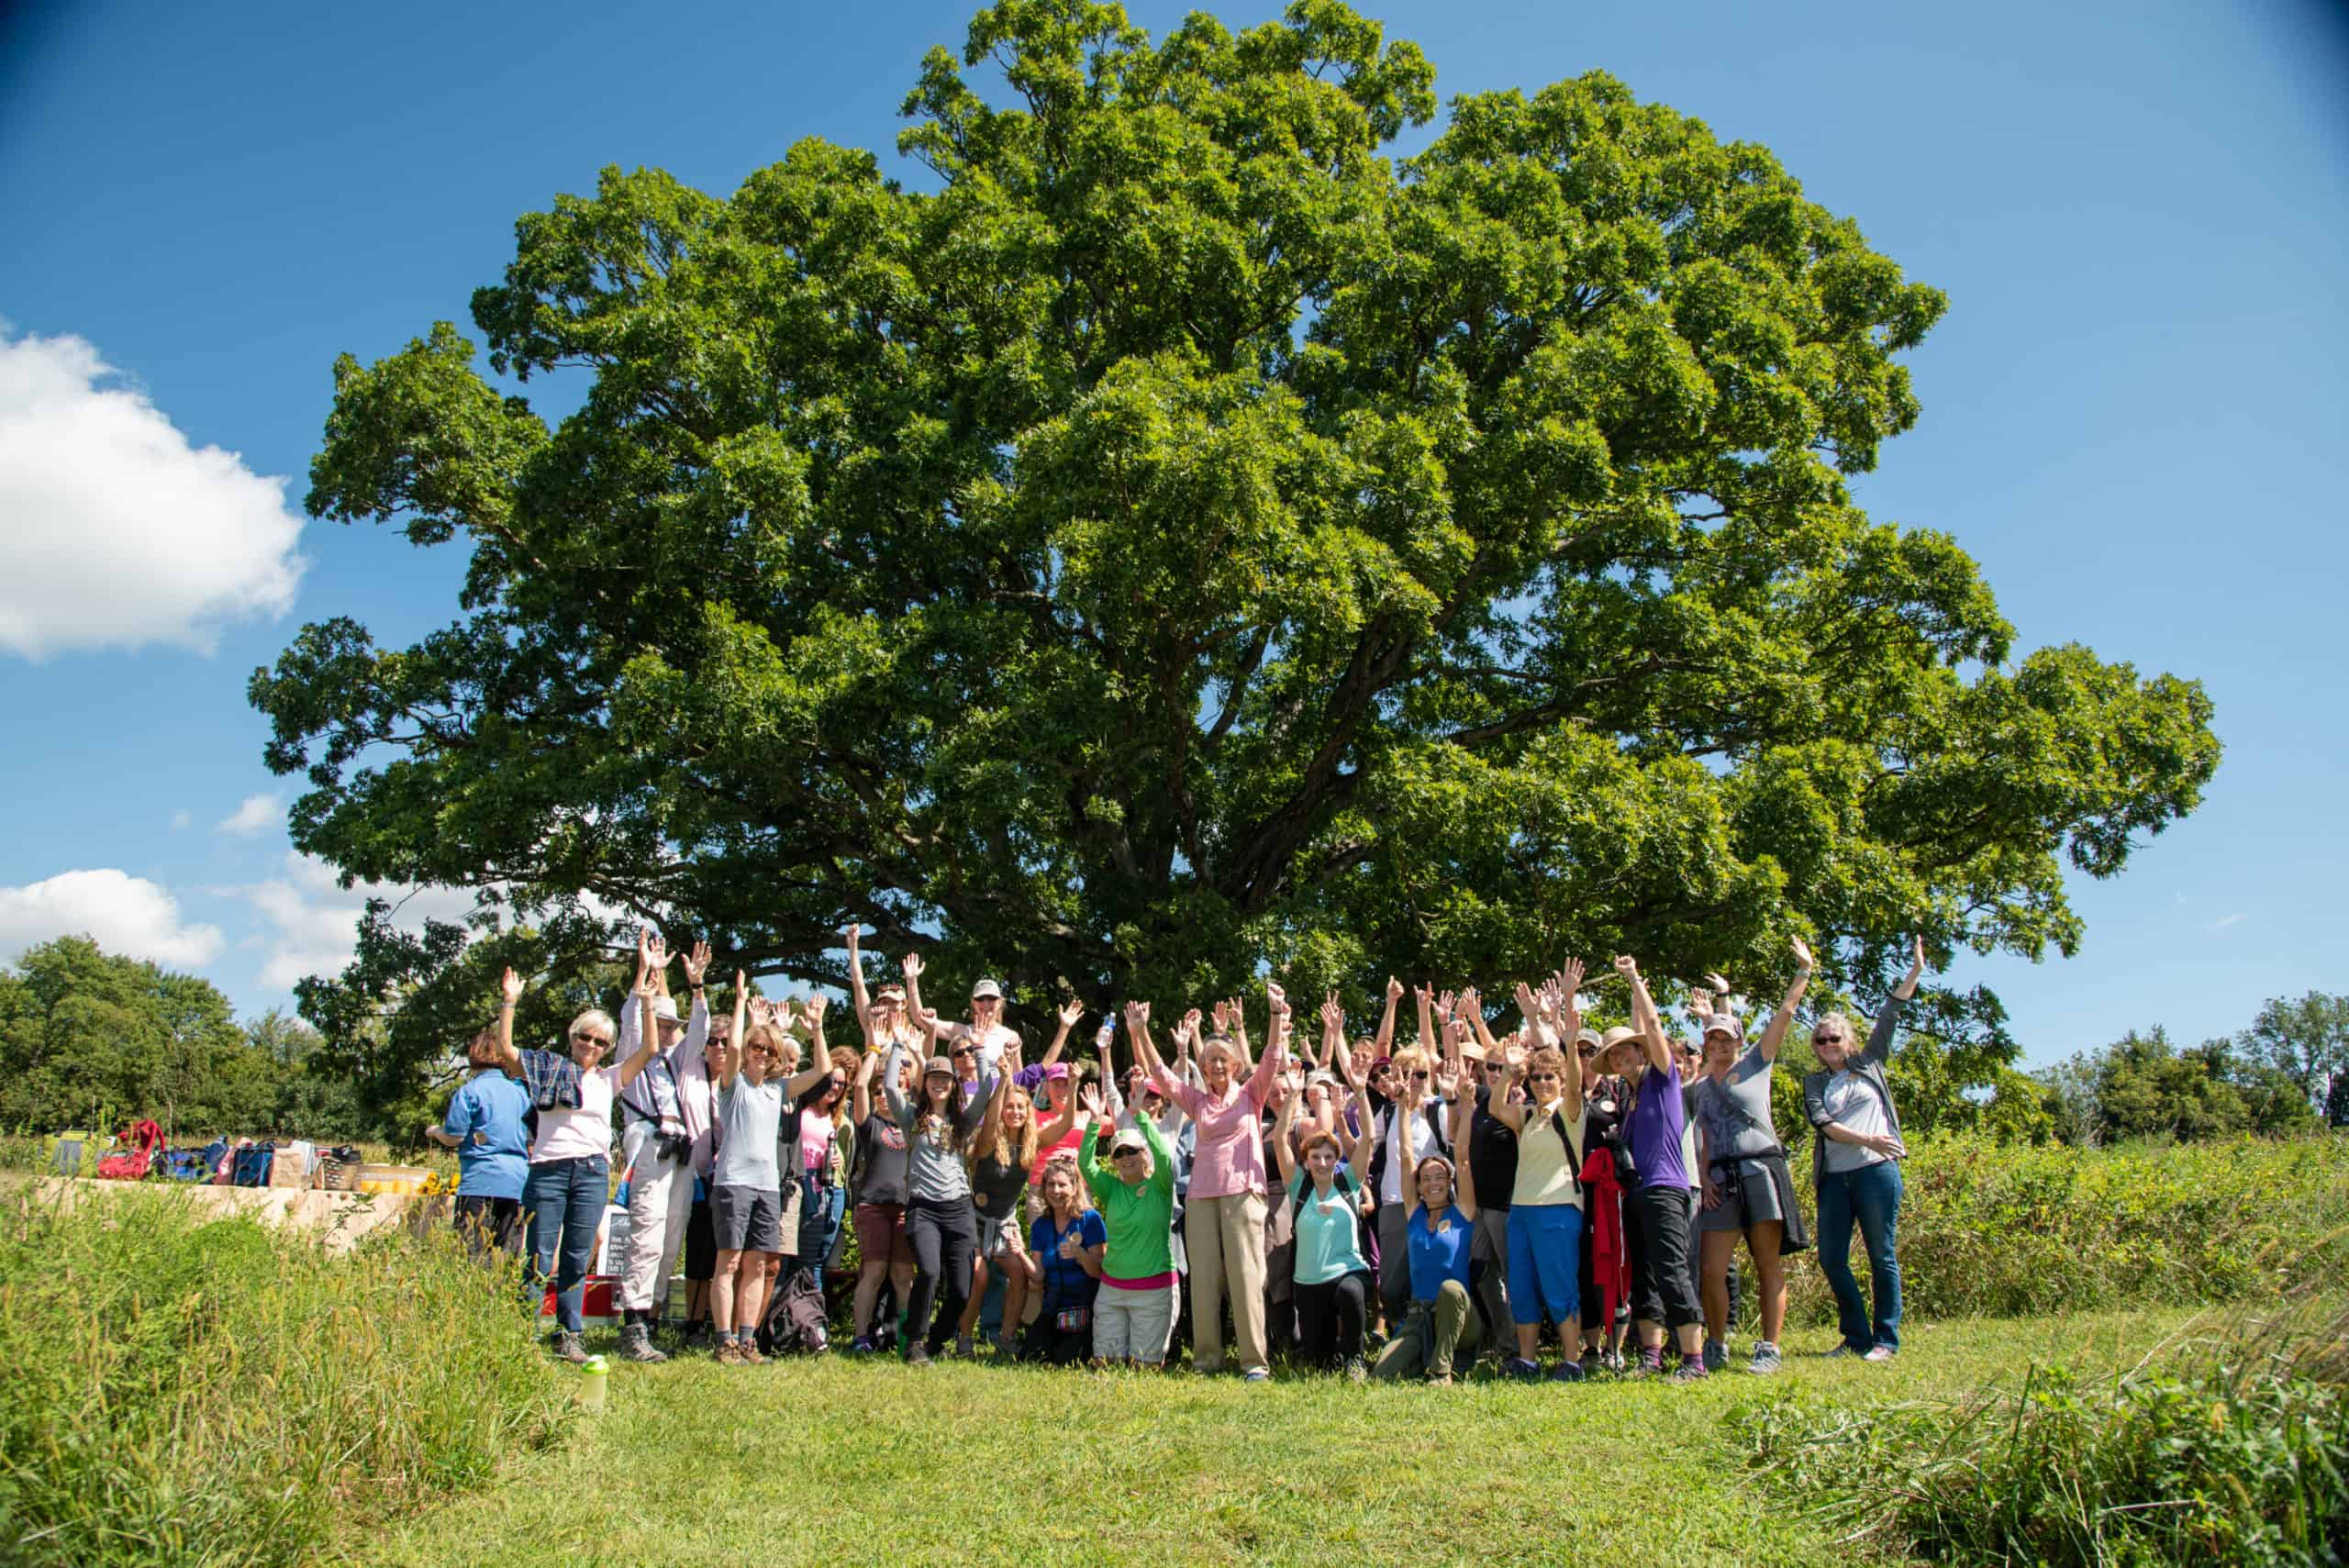 A group of people stand and knee with their arms up in front of a large oak tree on a sunny day.